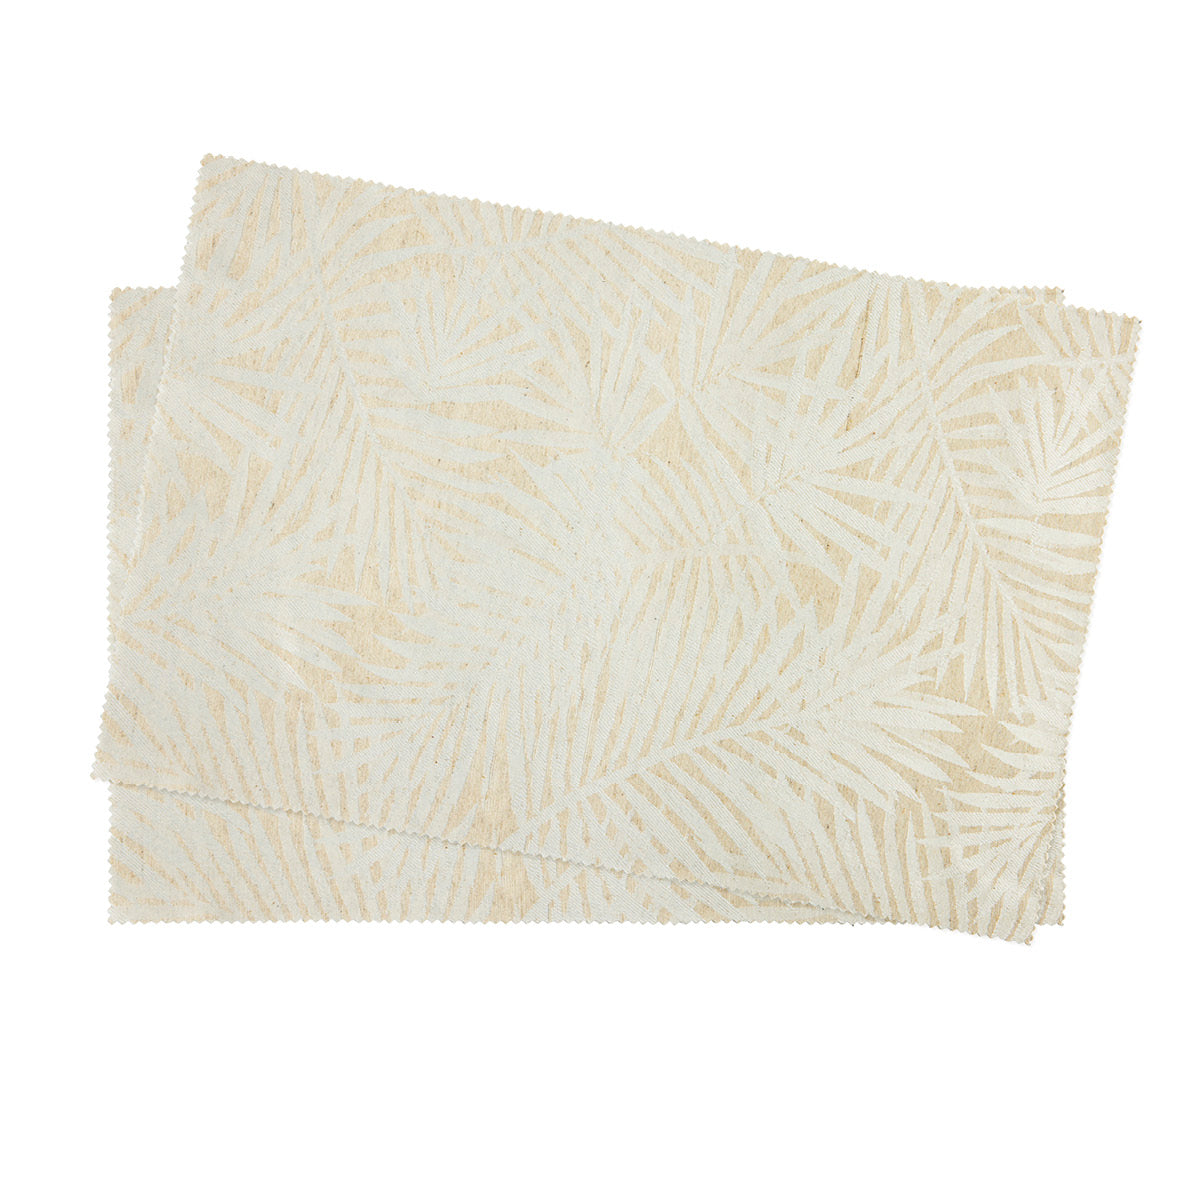 Set of 2 placemats - Pallmier Taupe